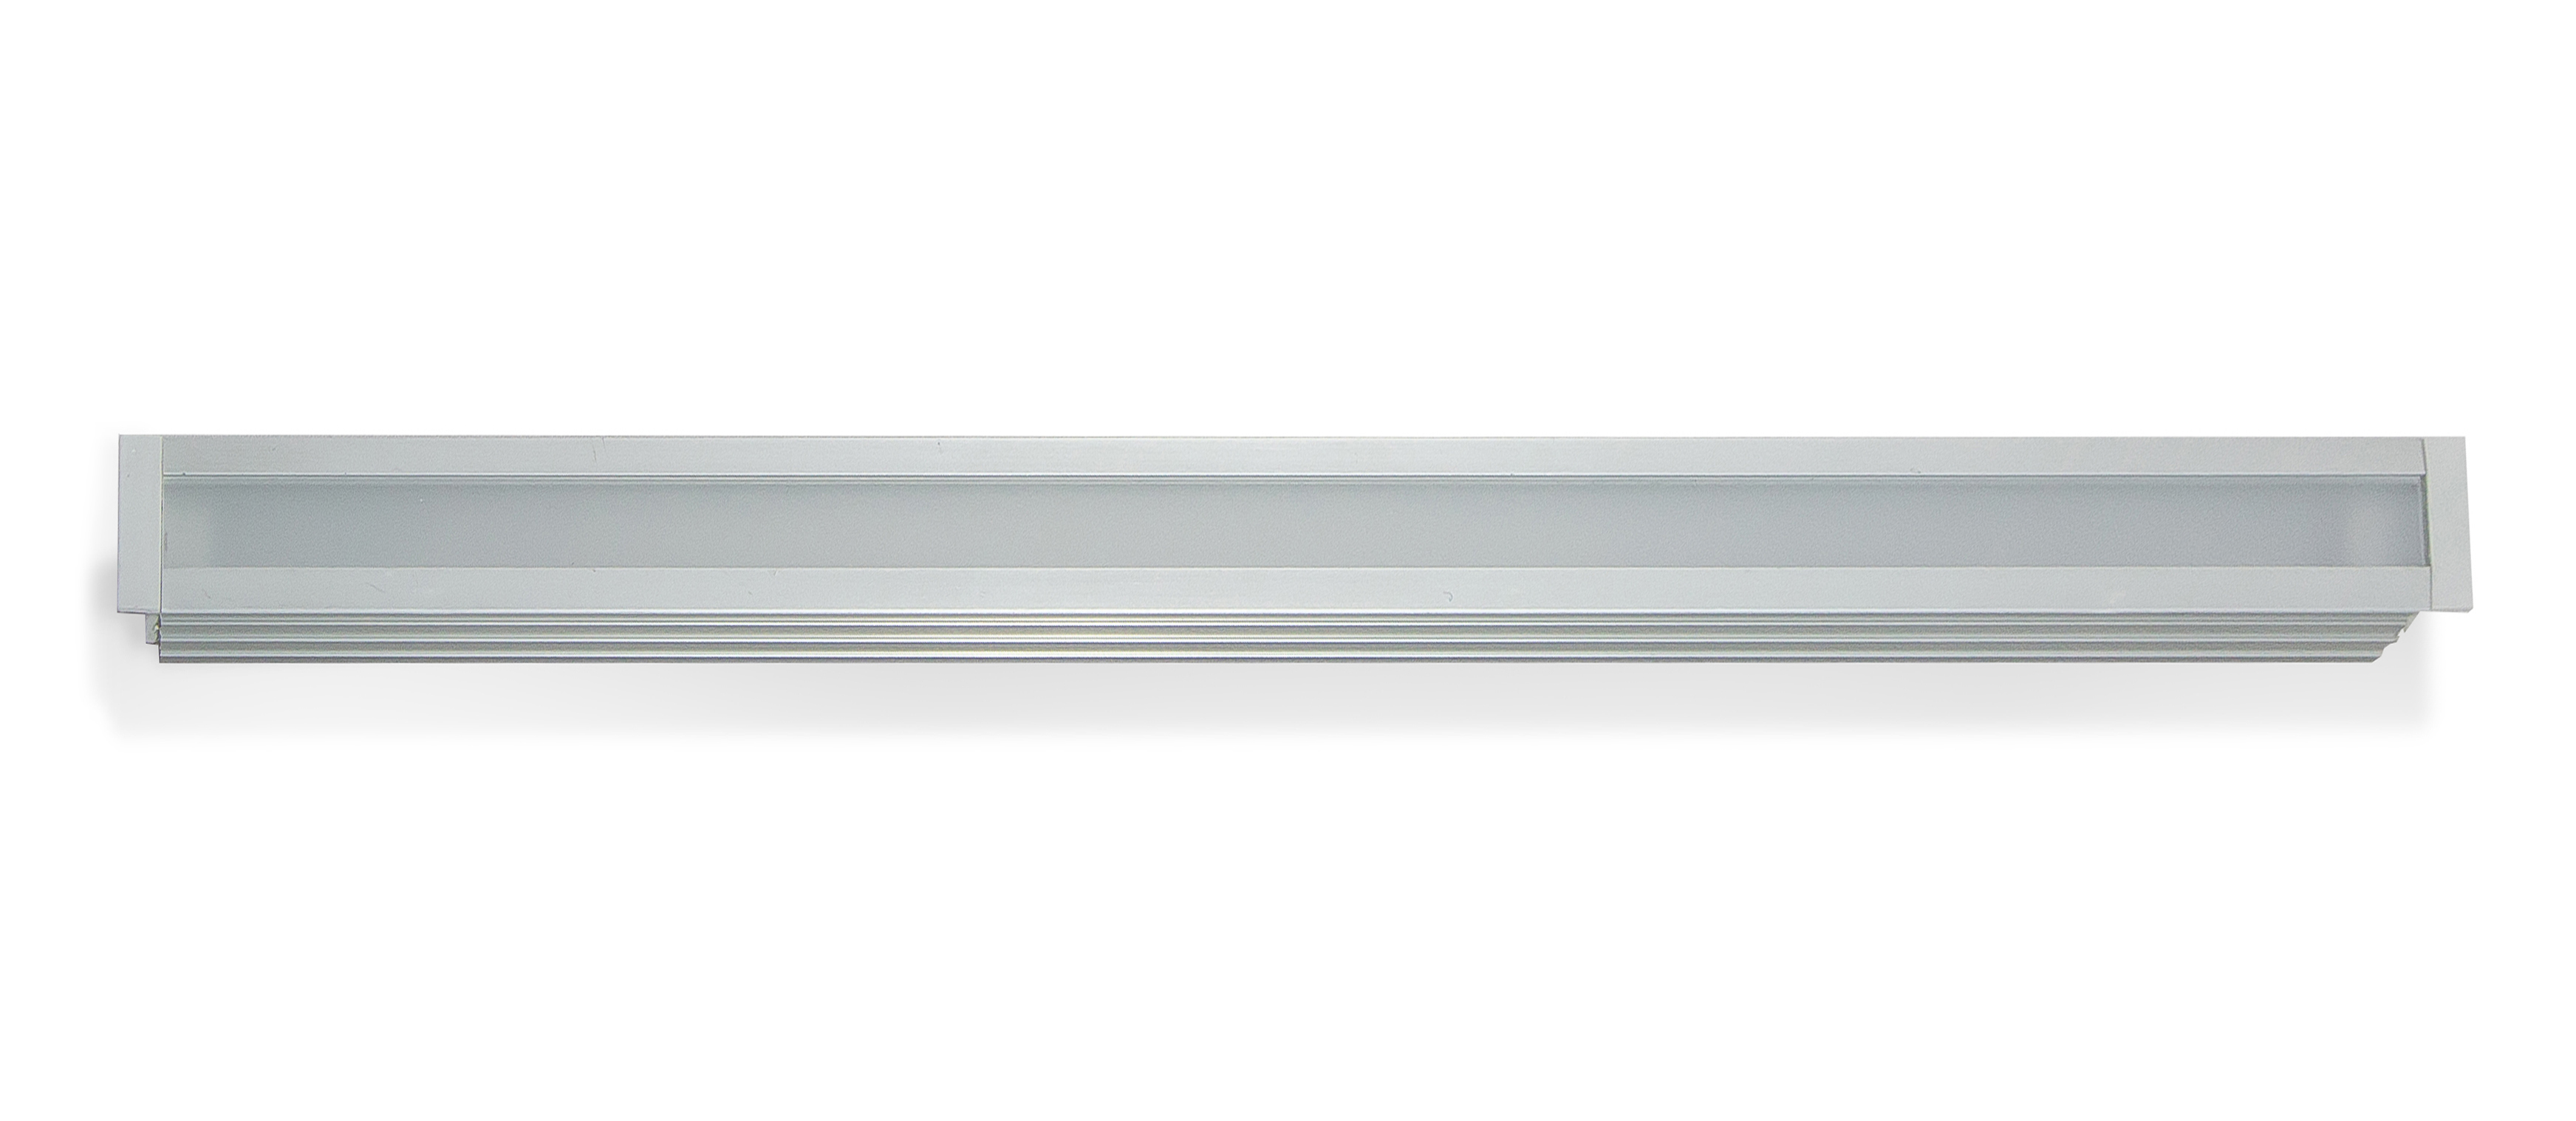 Led lay-line 450 mm 14,4 w 4000k arg. grigio touch